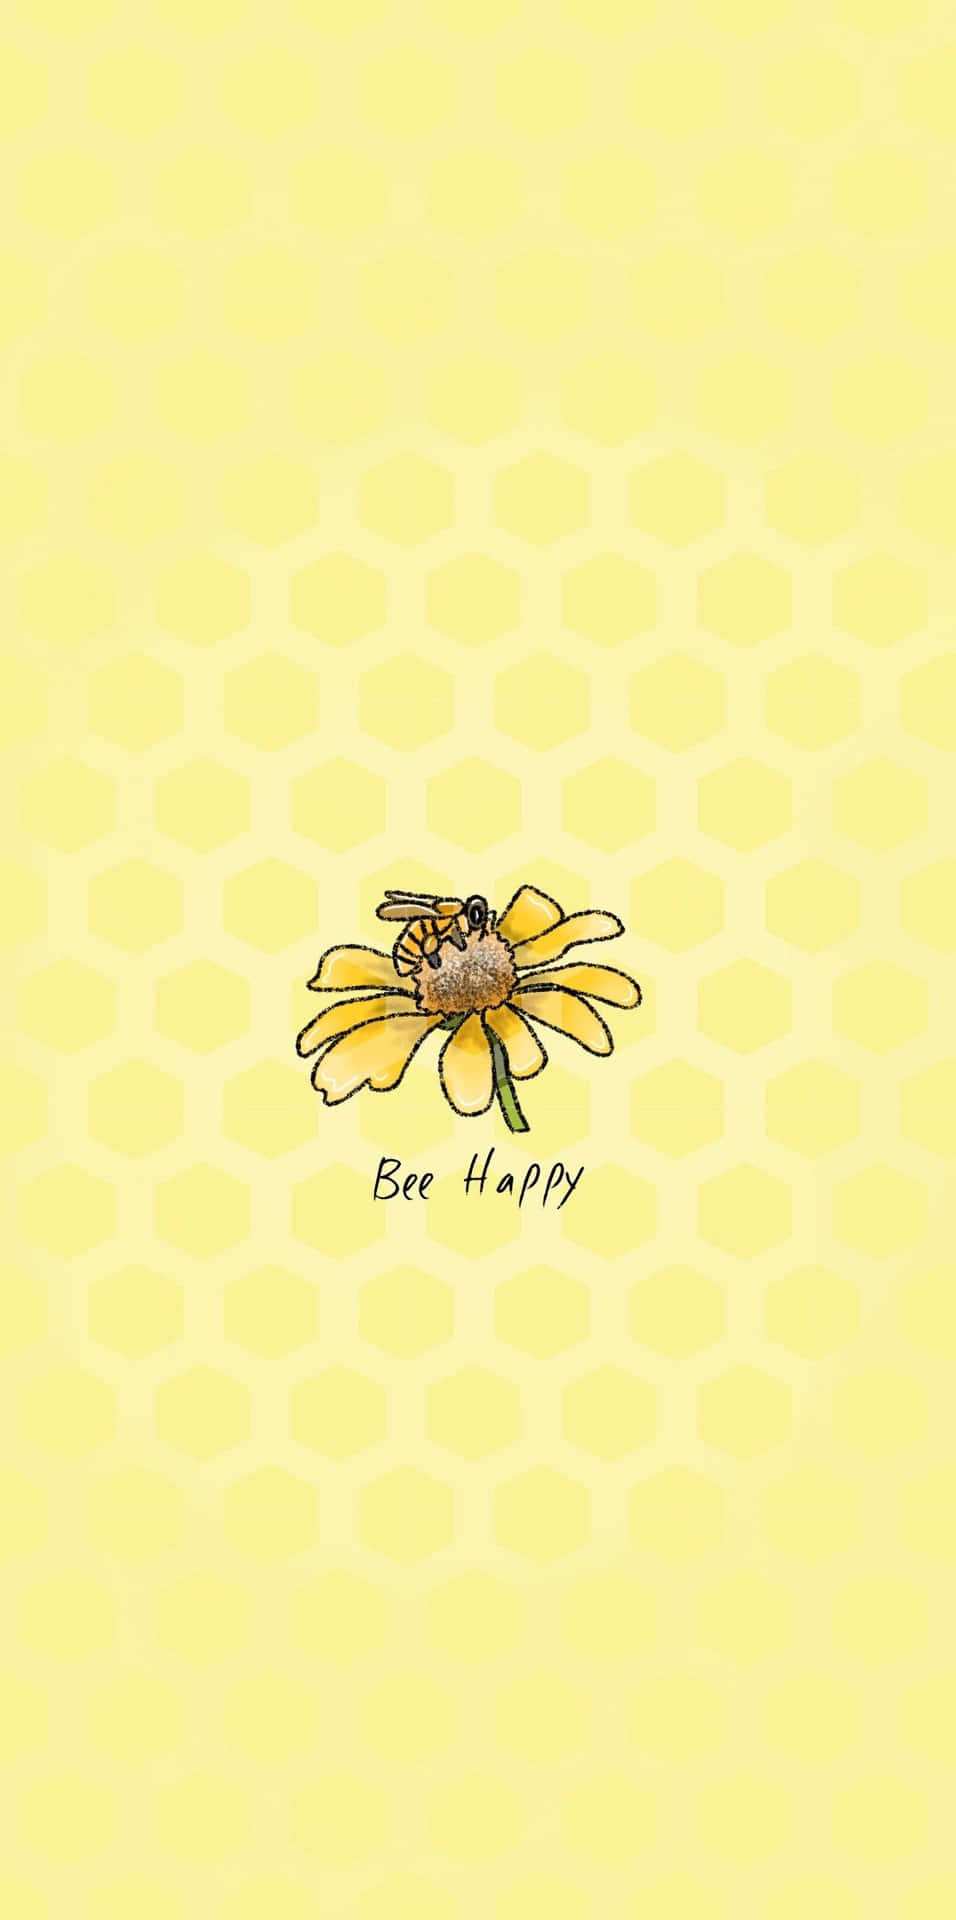 A Vibrant Aesthetic Bee on a Flower Wallpaper